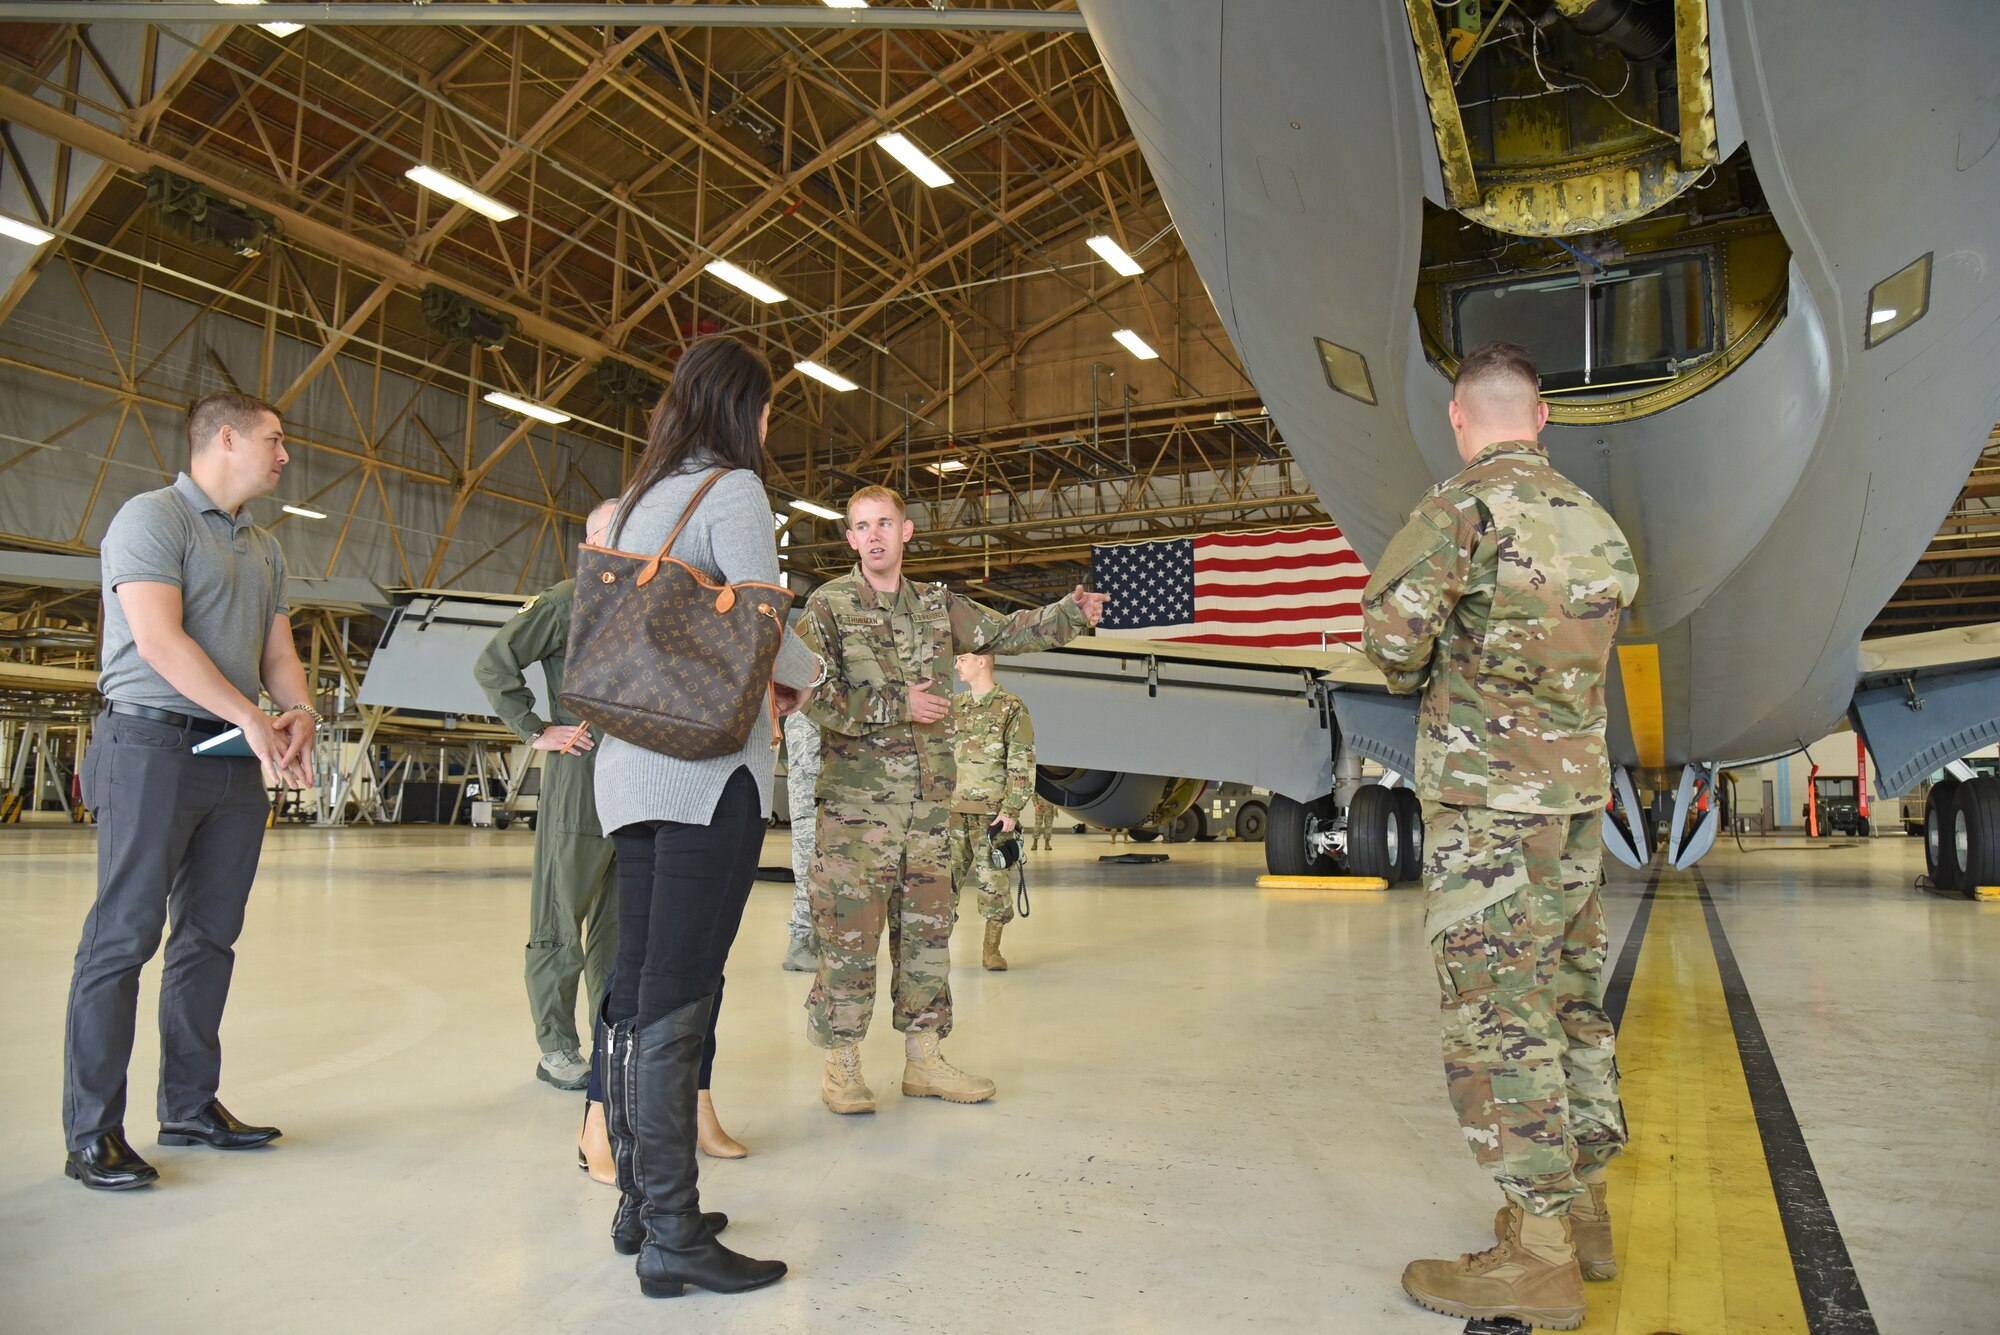 Members of the 92nd Maintenance Squadron talk with congressional staffers about the types of maintenance tasks flying crew chiefs are responsible for on the KC-135 Stratotanker during a tour Oct. 18, 2018, at Fairchild Air Force Base, Washington. The staffers represented numerous leaders in Washington D.C. including Georgia Reps. Rick Allen and Sanford Bishop, Washington state Reps. Derek Kilmer and Cathy McMorris Rodgers, and North Carolina Rep. Walter Jones. (U.S. Air Force photo/Staff Sgt. Mackenzie Mendez)